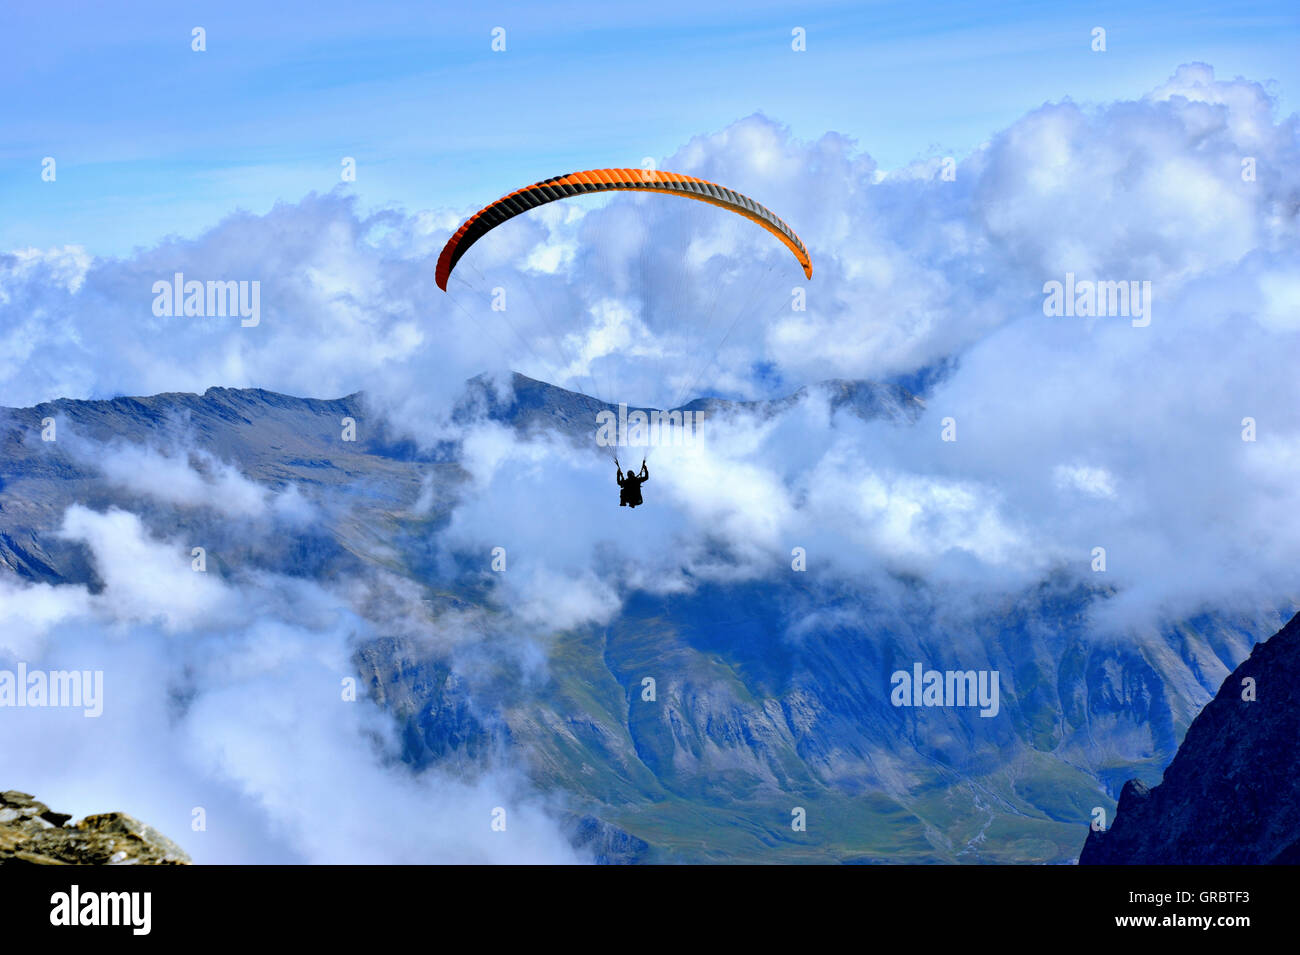 Paraglider Starting Jumps From Mountain La Meije, French Alps, France Stock Photo